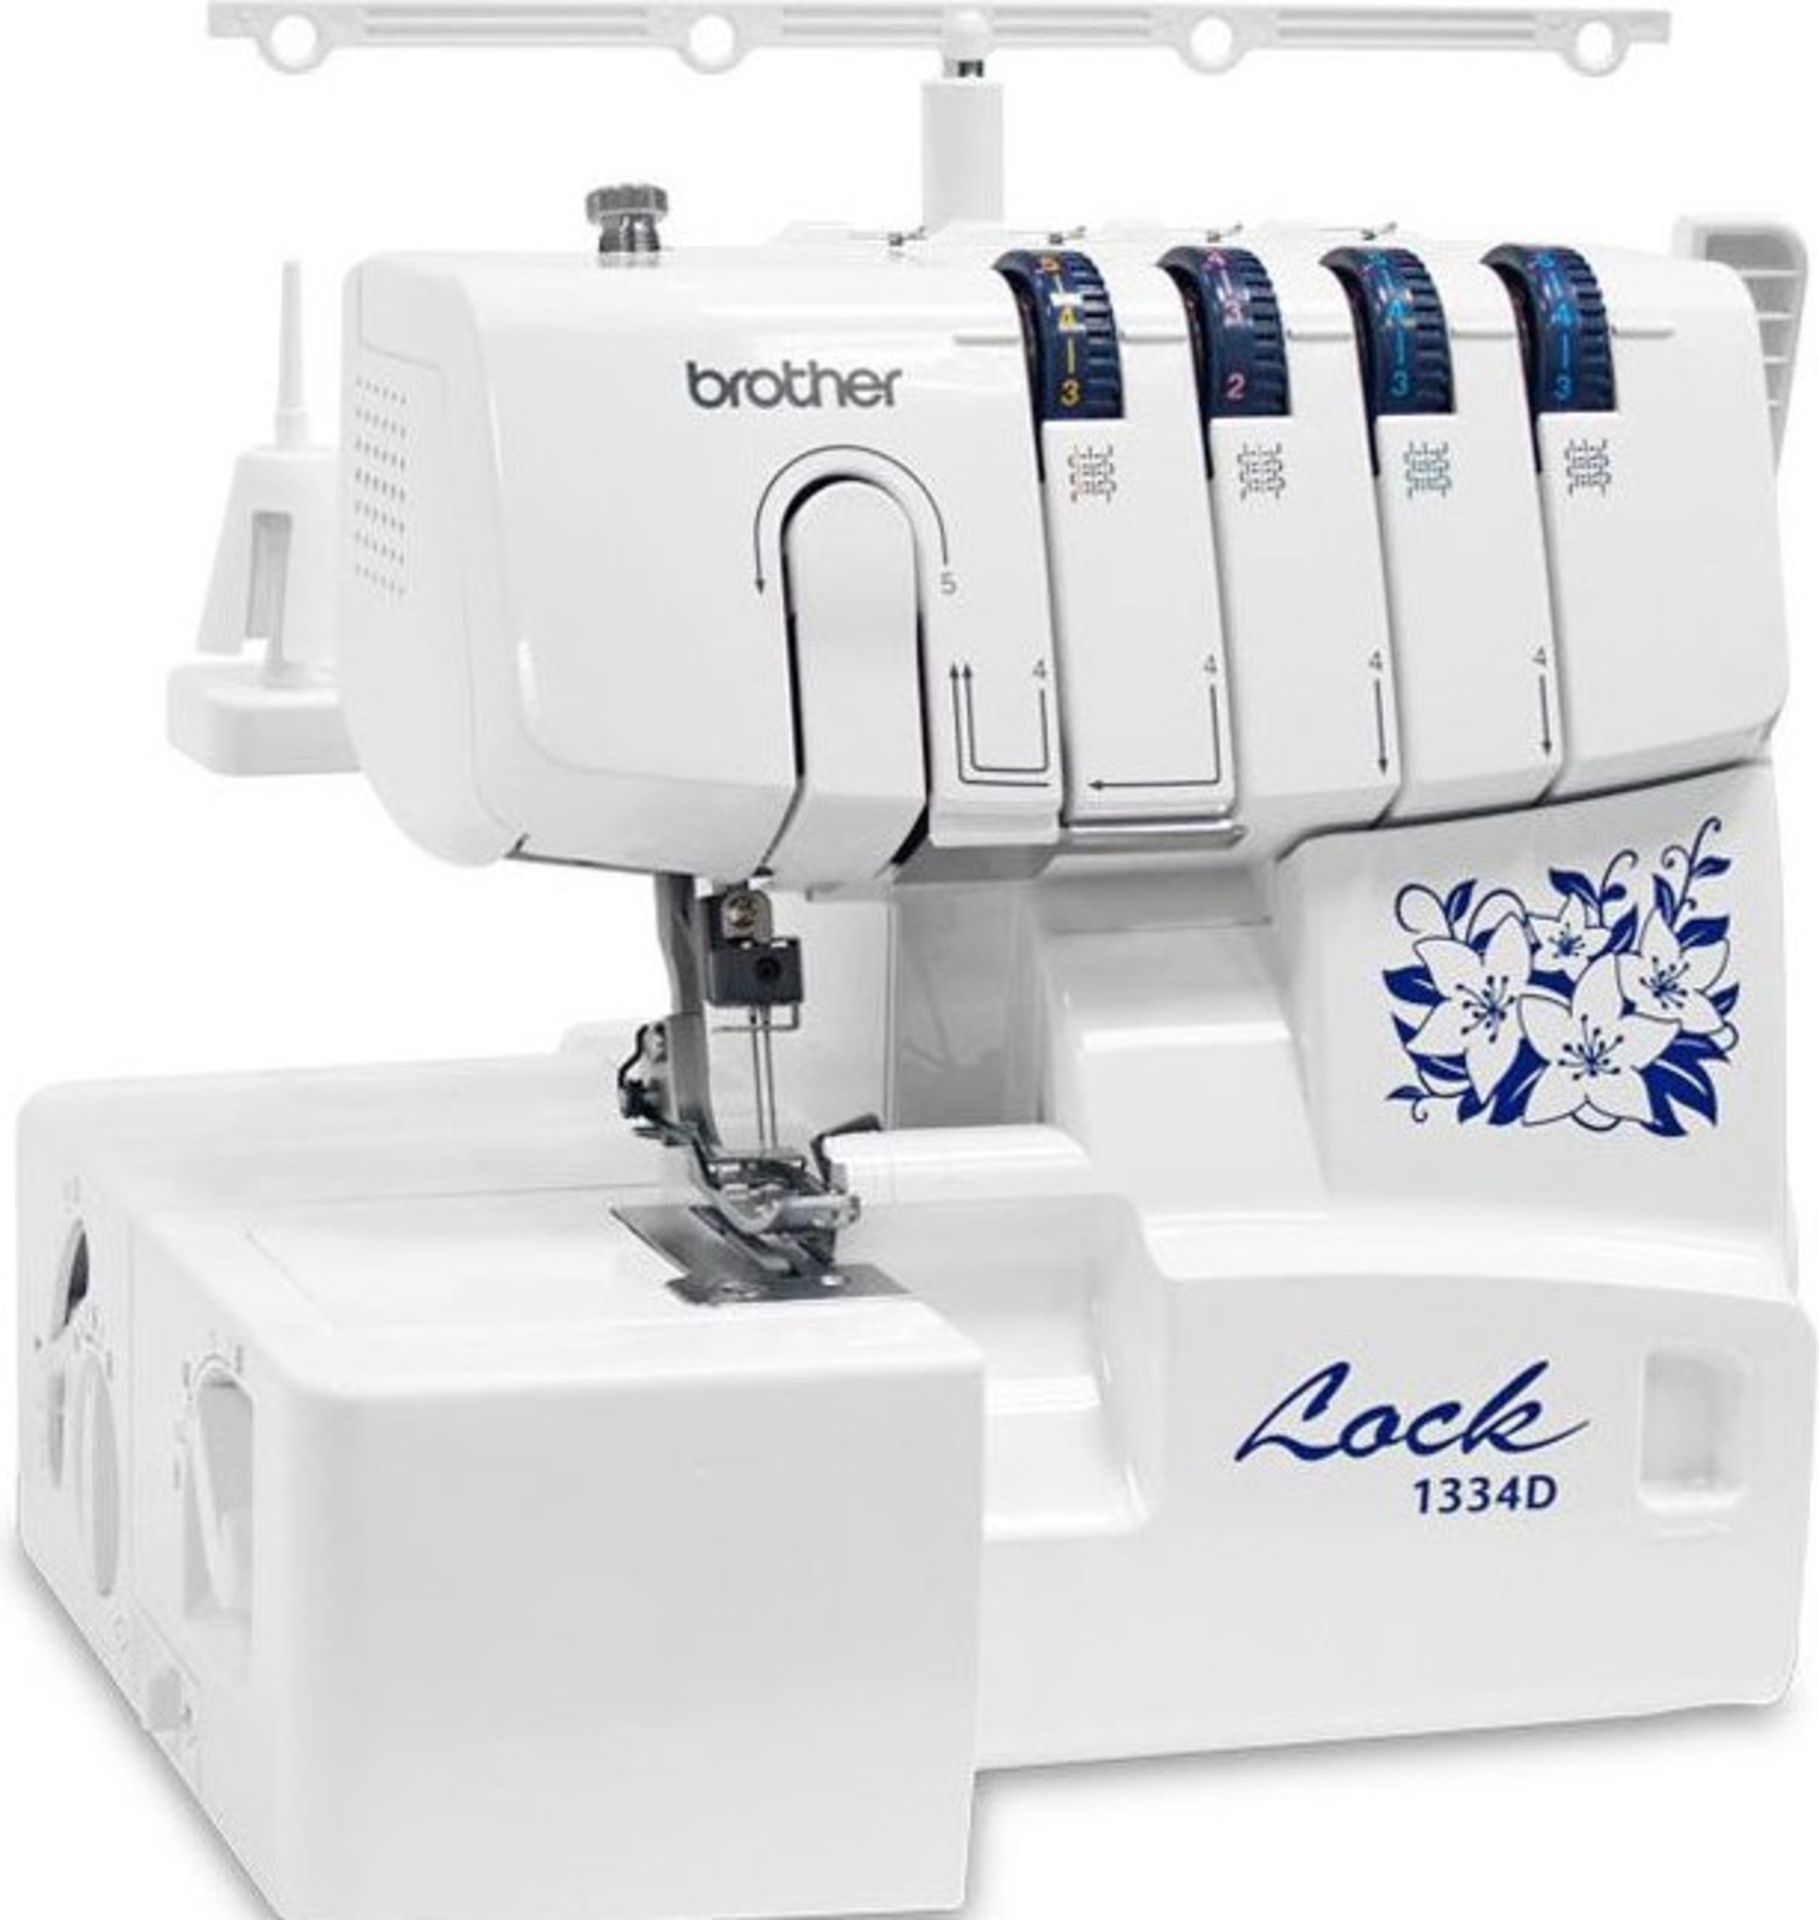 Brother 1334D overlock Sewing machine RRP £189.99